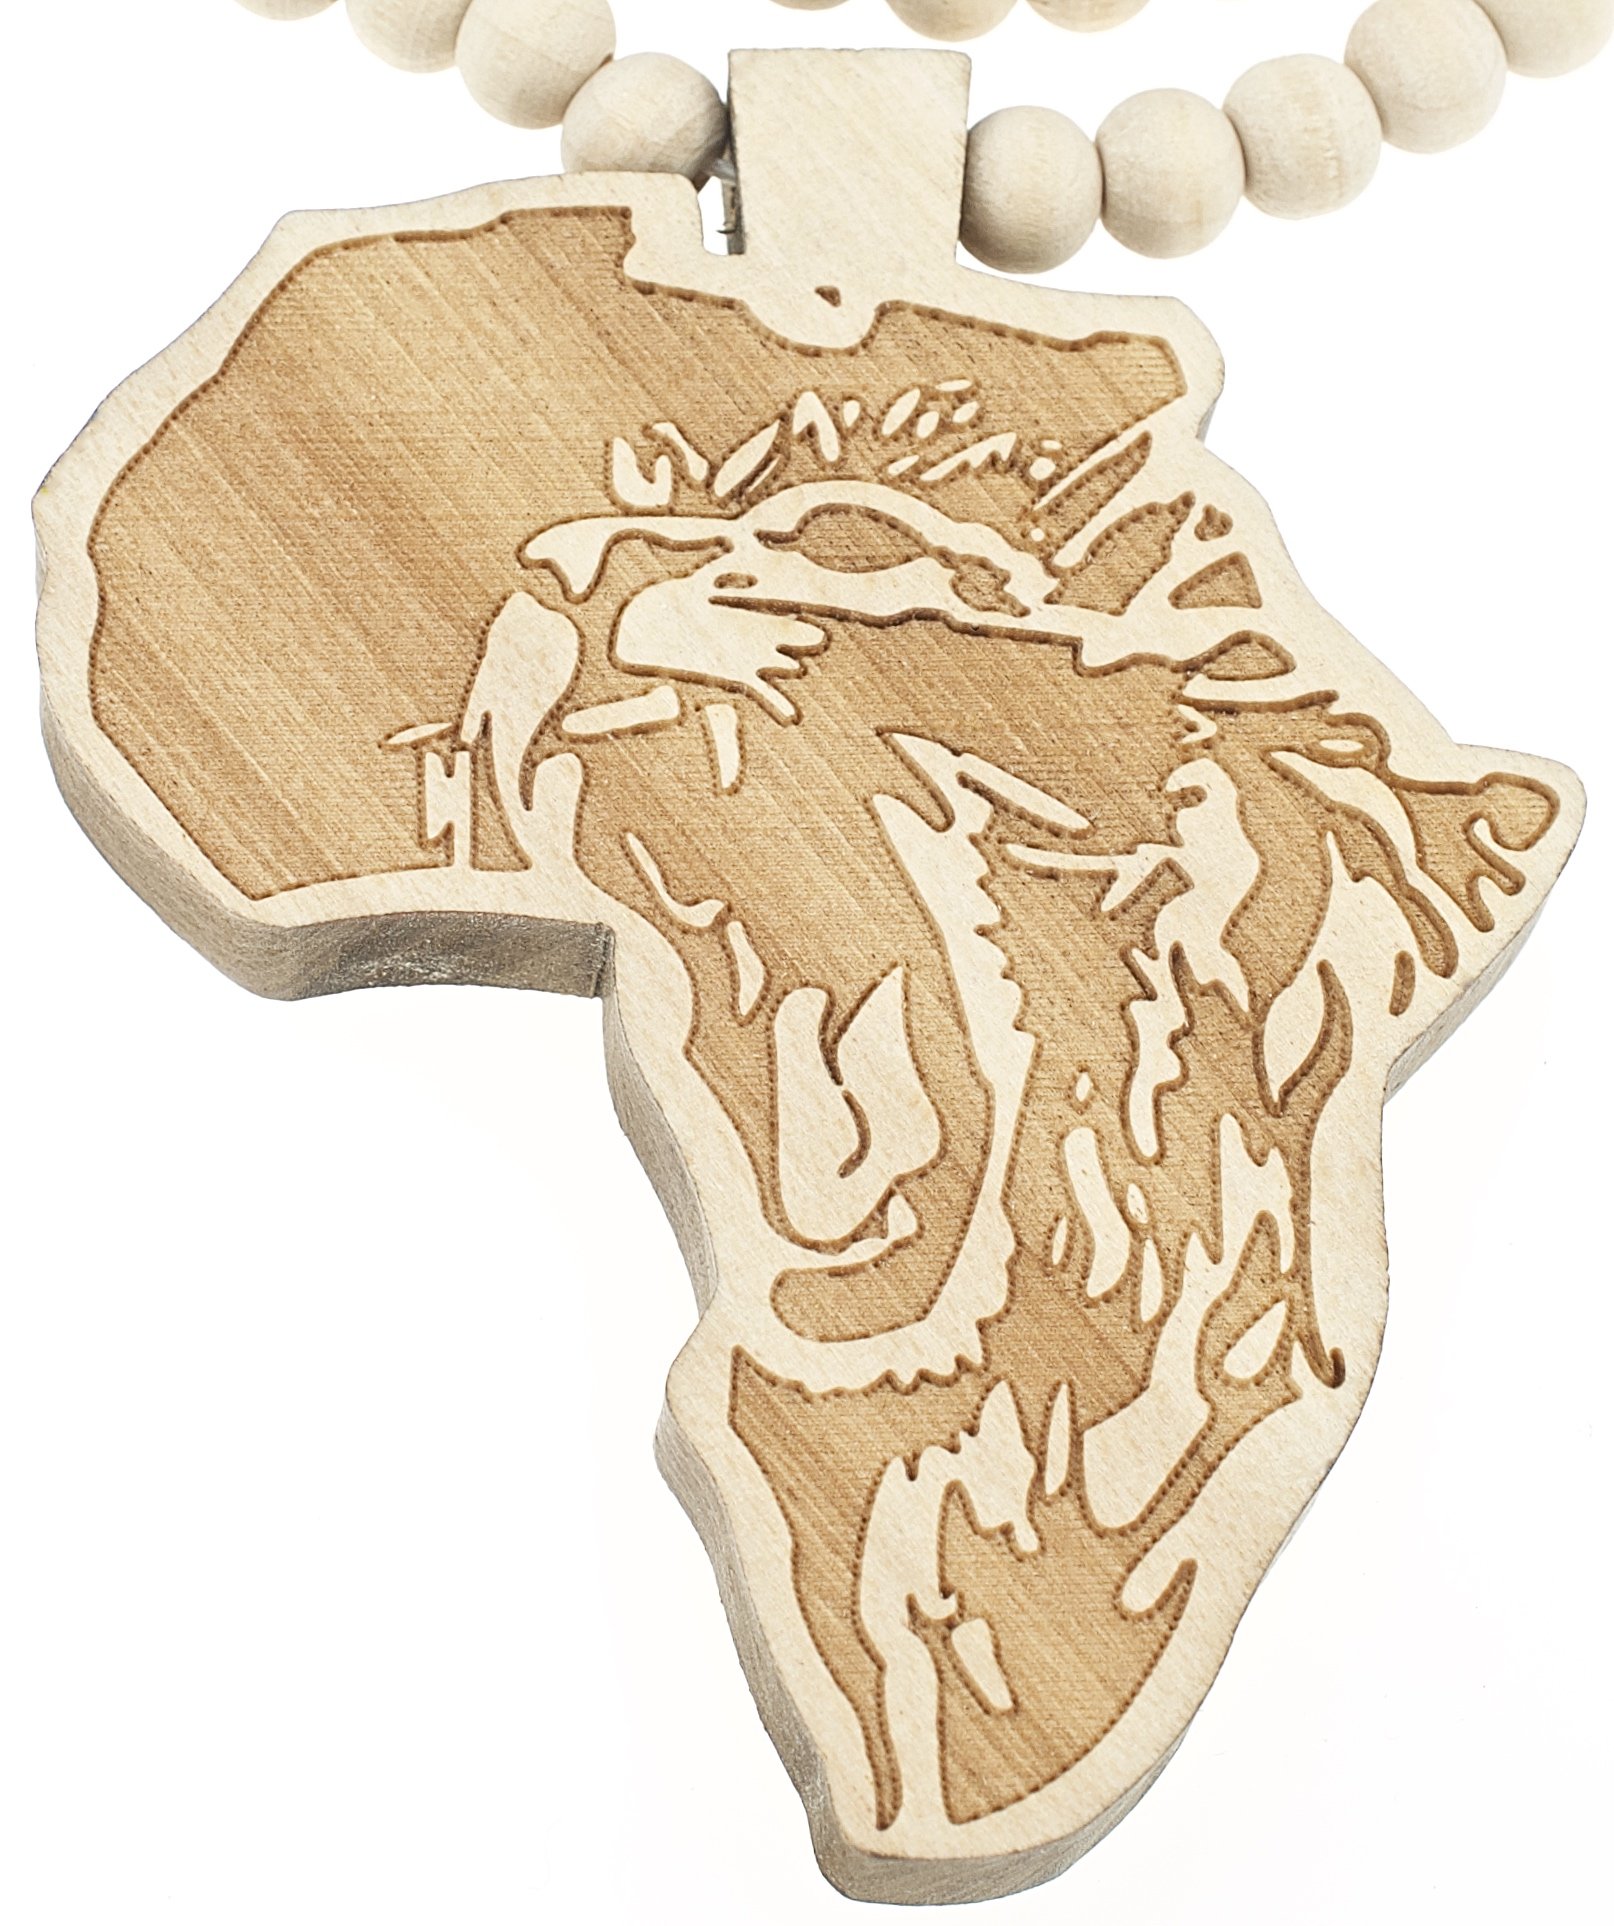 GWOOD Africa Lion Good Wood Replica Pendant 36 Inch Long Necklace